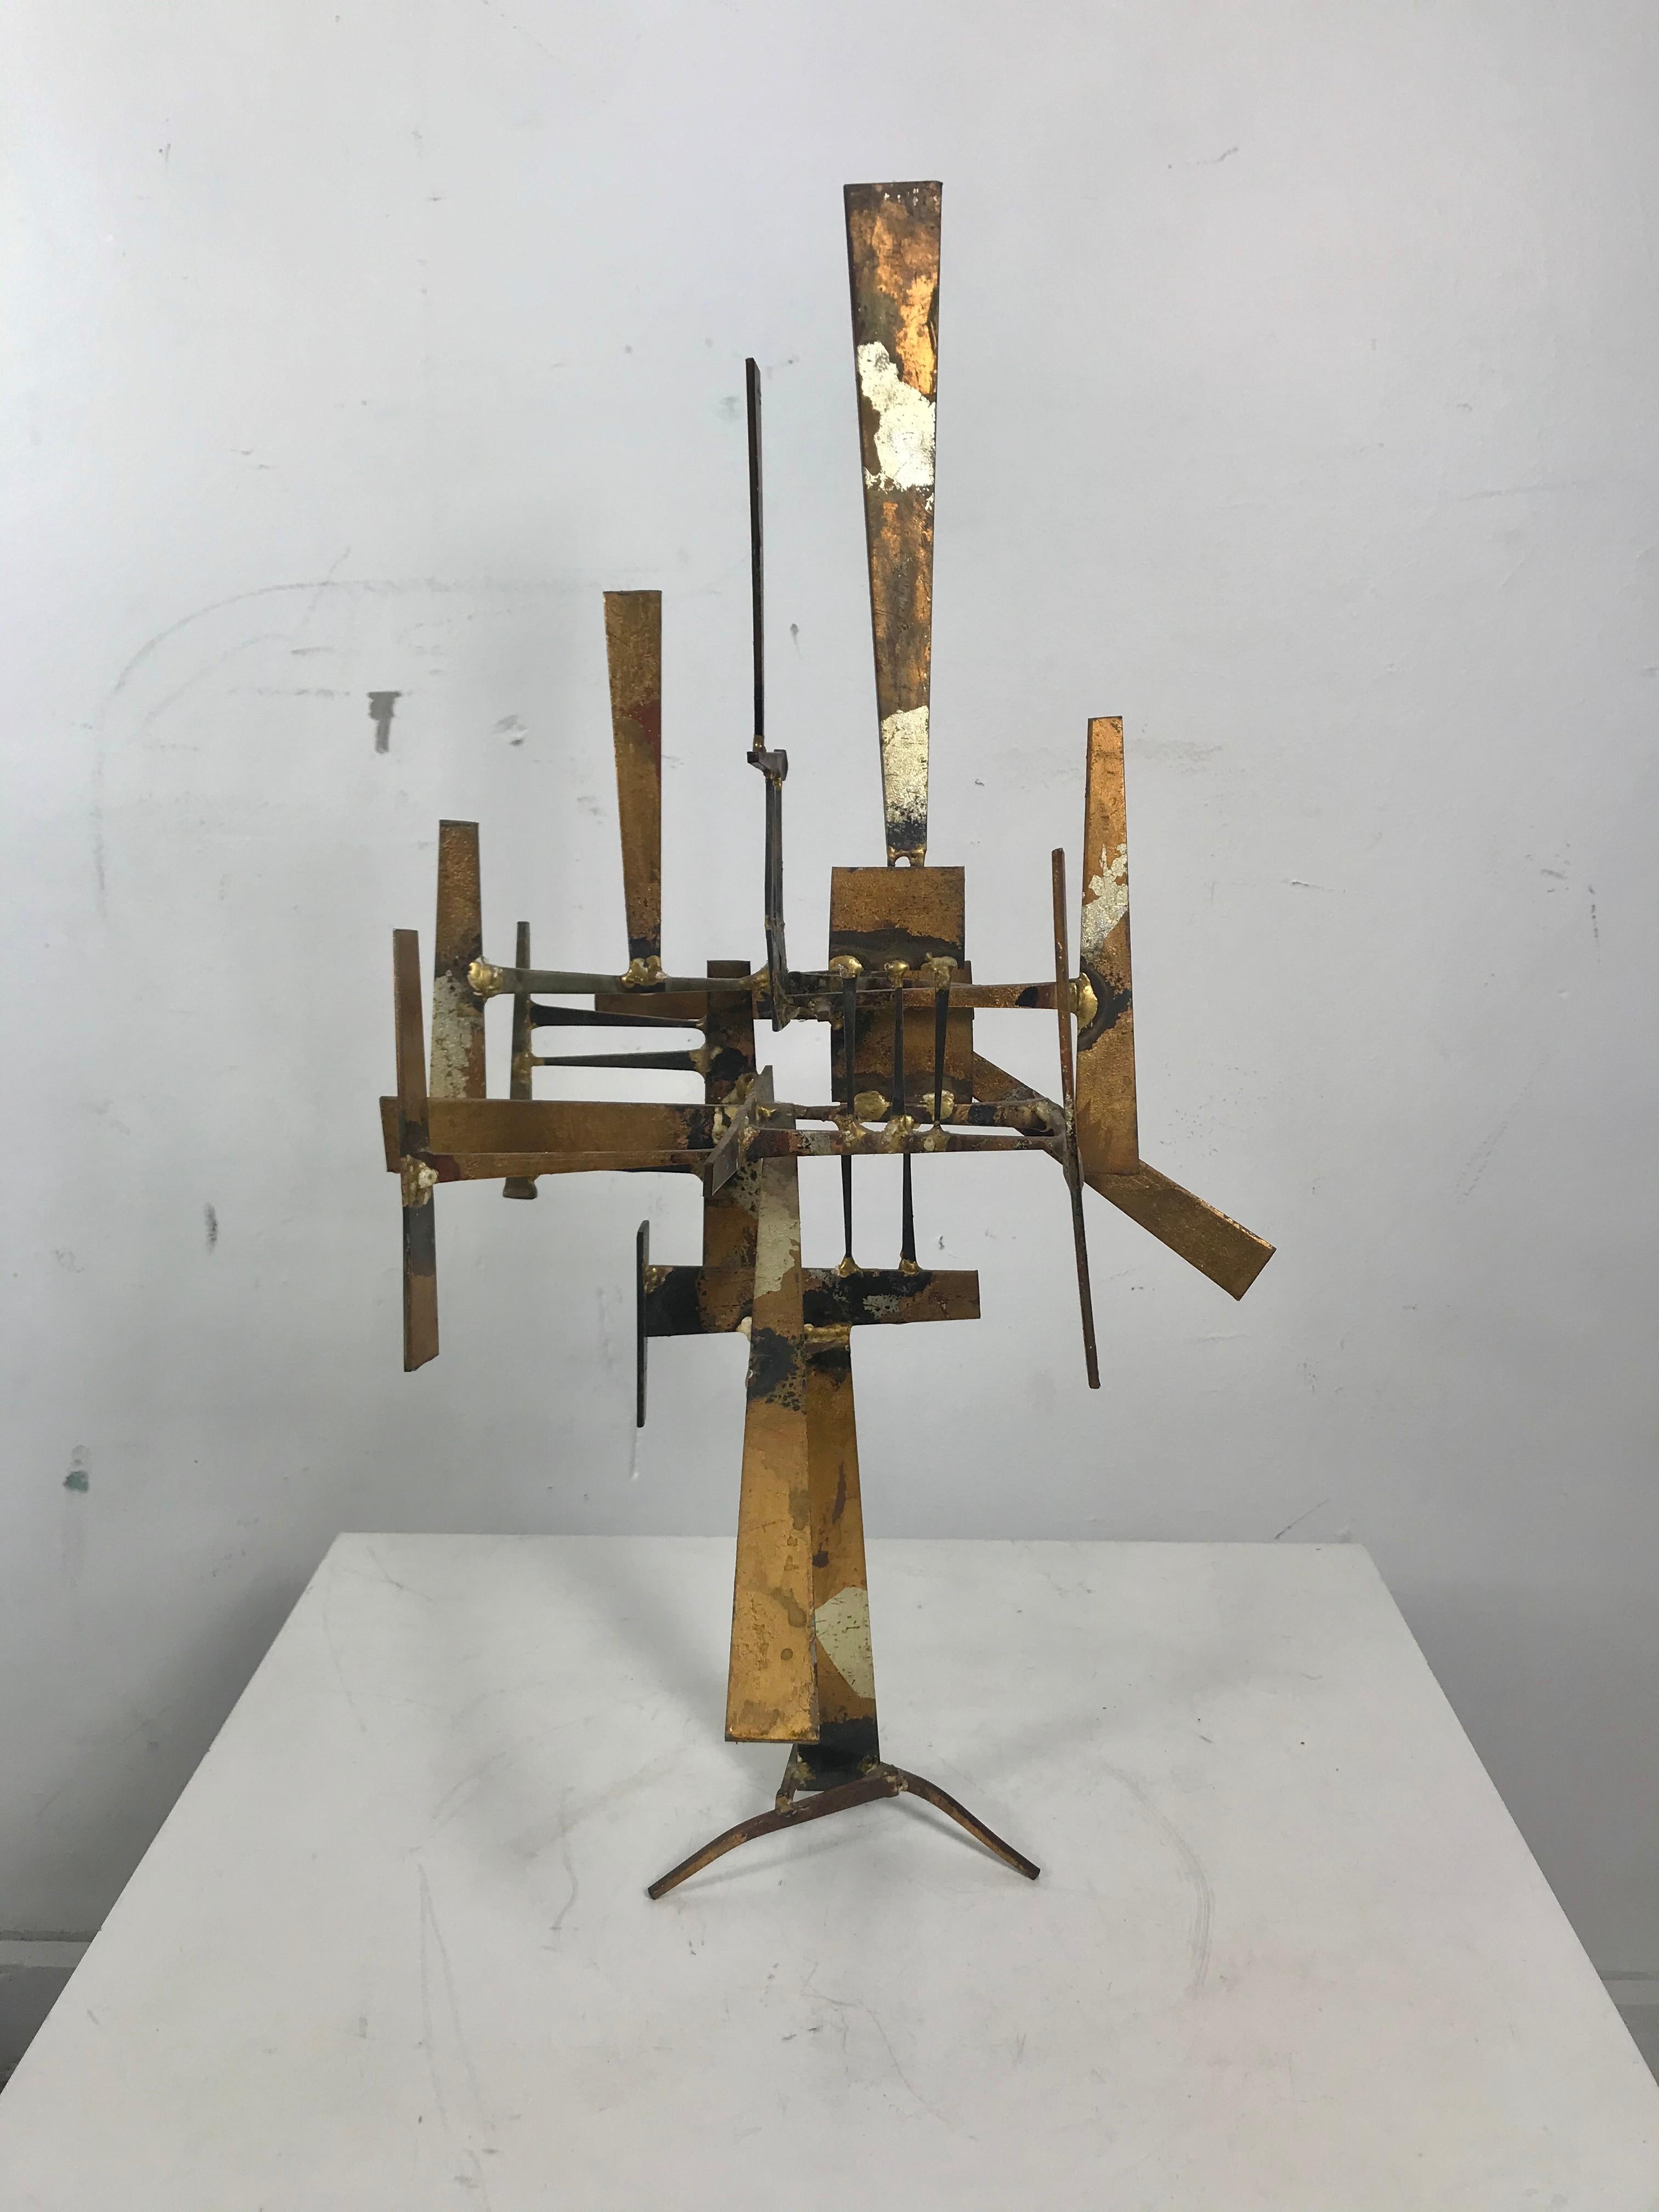 Original free standing, gilt and silver leafed sculpture by the innovative New York artist William Bowie. Bowie's showroom was on the Upper East Side of Manhattan and he was an early, important Pioneer (along side Harry Bertoia) in the use of welded